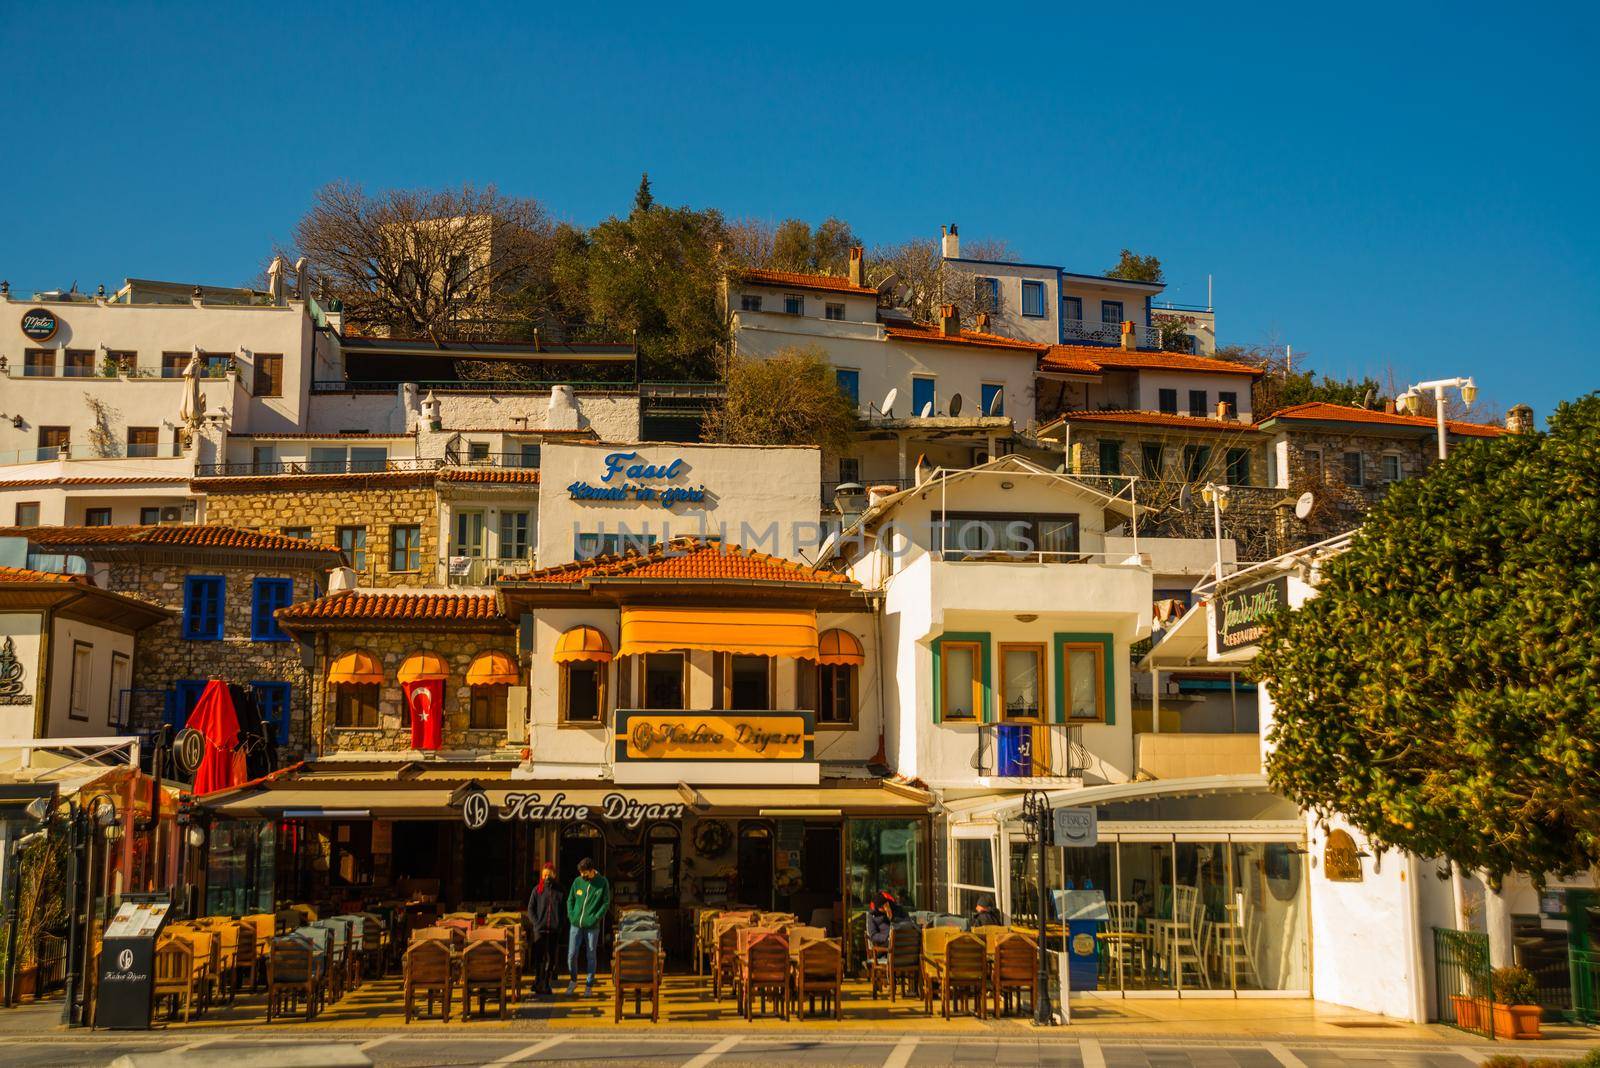 MARMARIS, MUGLA, TURKEY: Tourist street with cafes and restaurants in the center of the Old Town in Marmaris